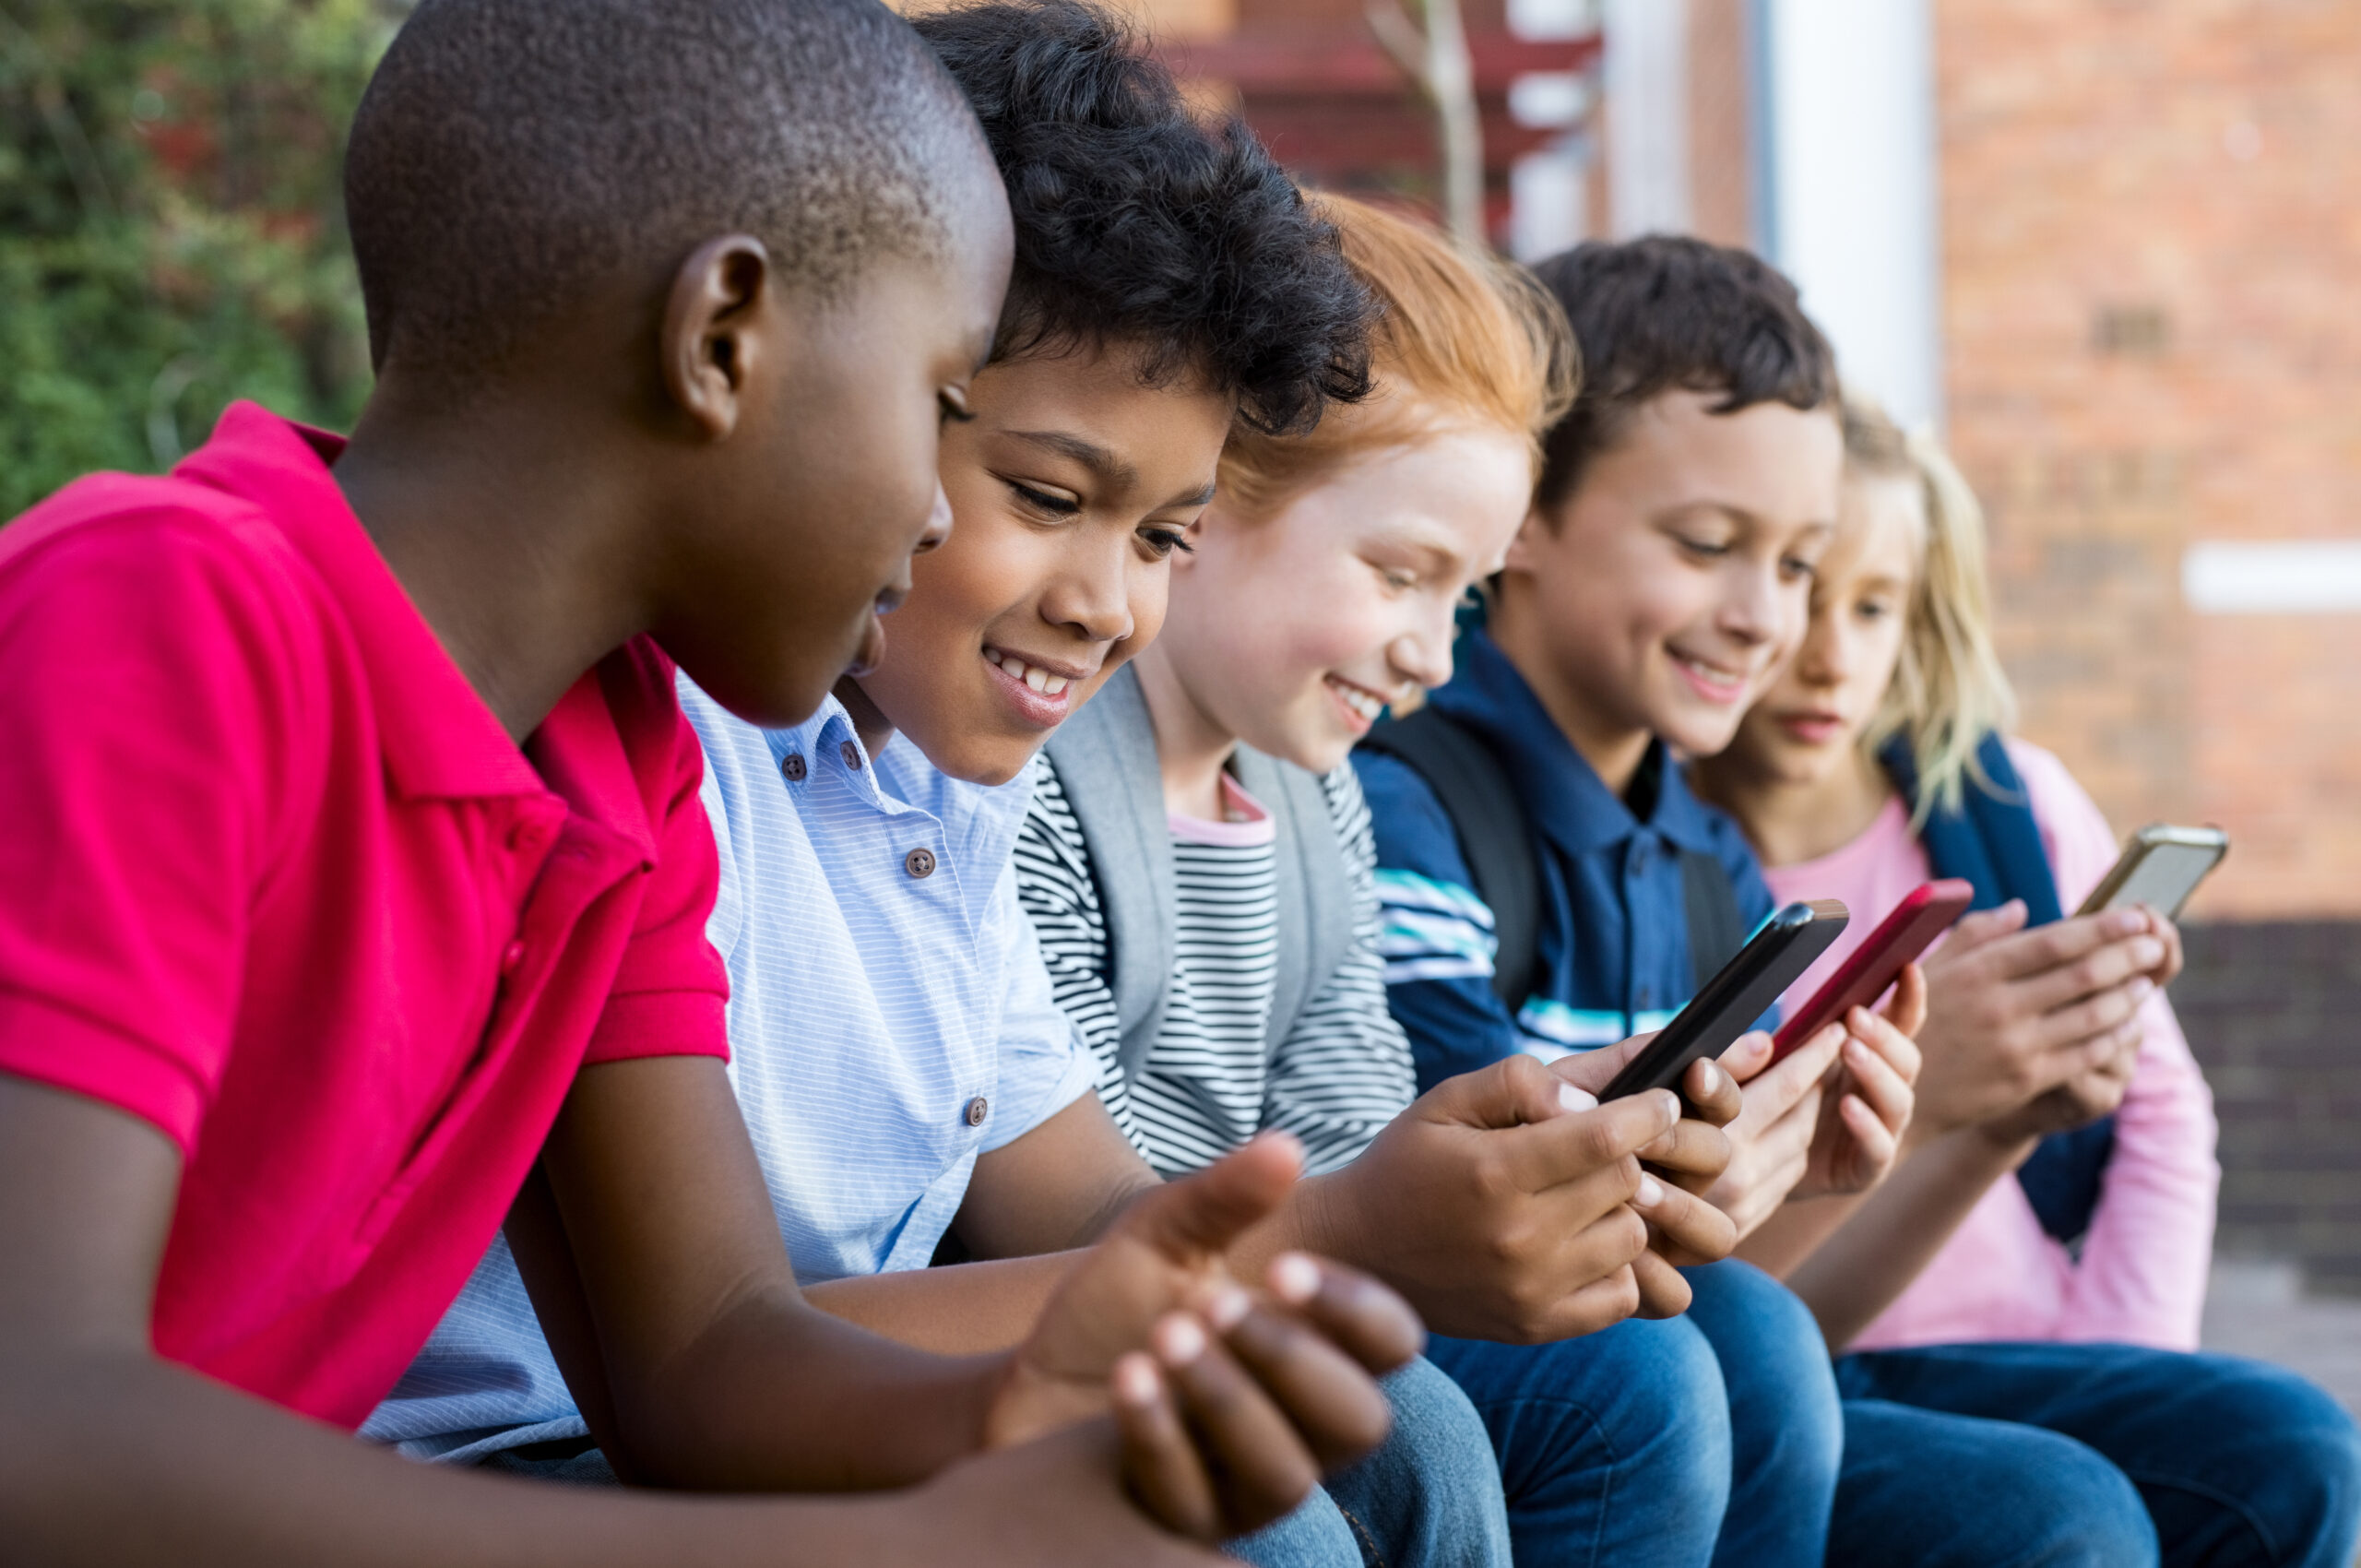 Children sitting together outside using their phones and smiling